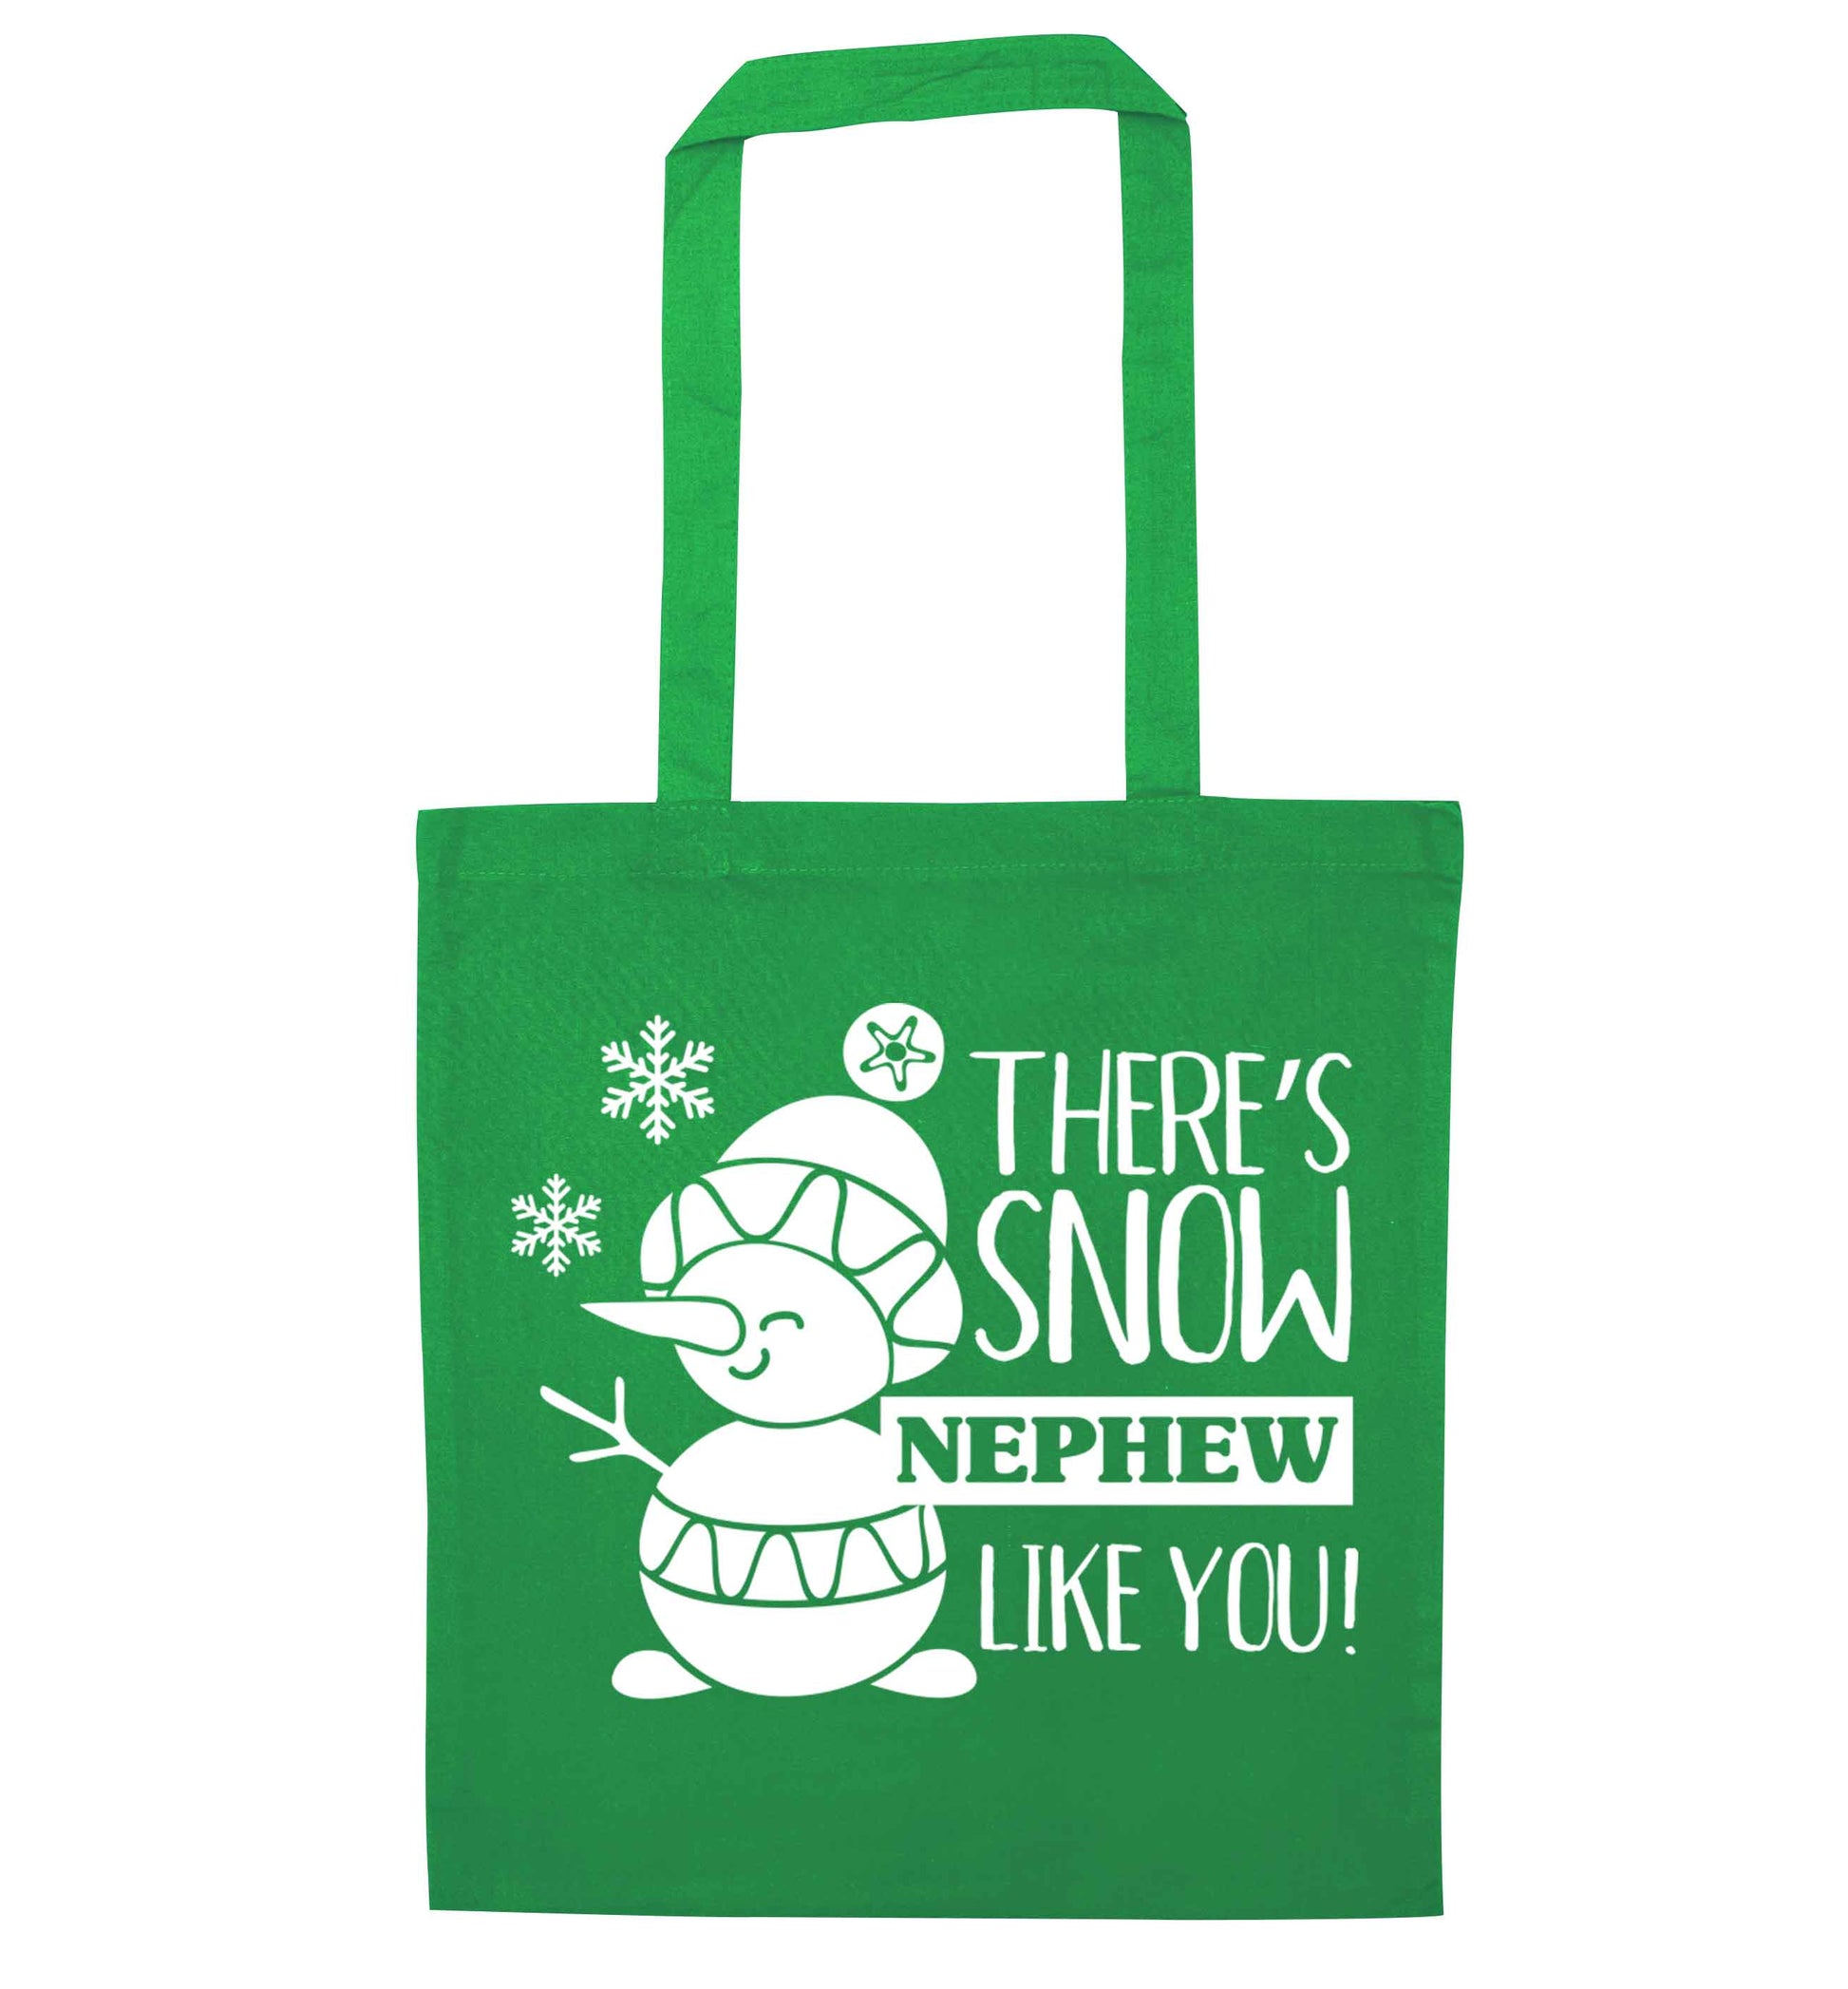 There's snow nephew like you green tote bag